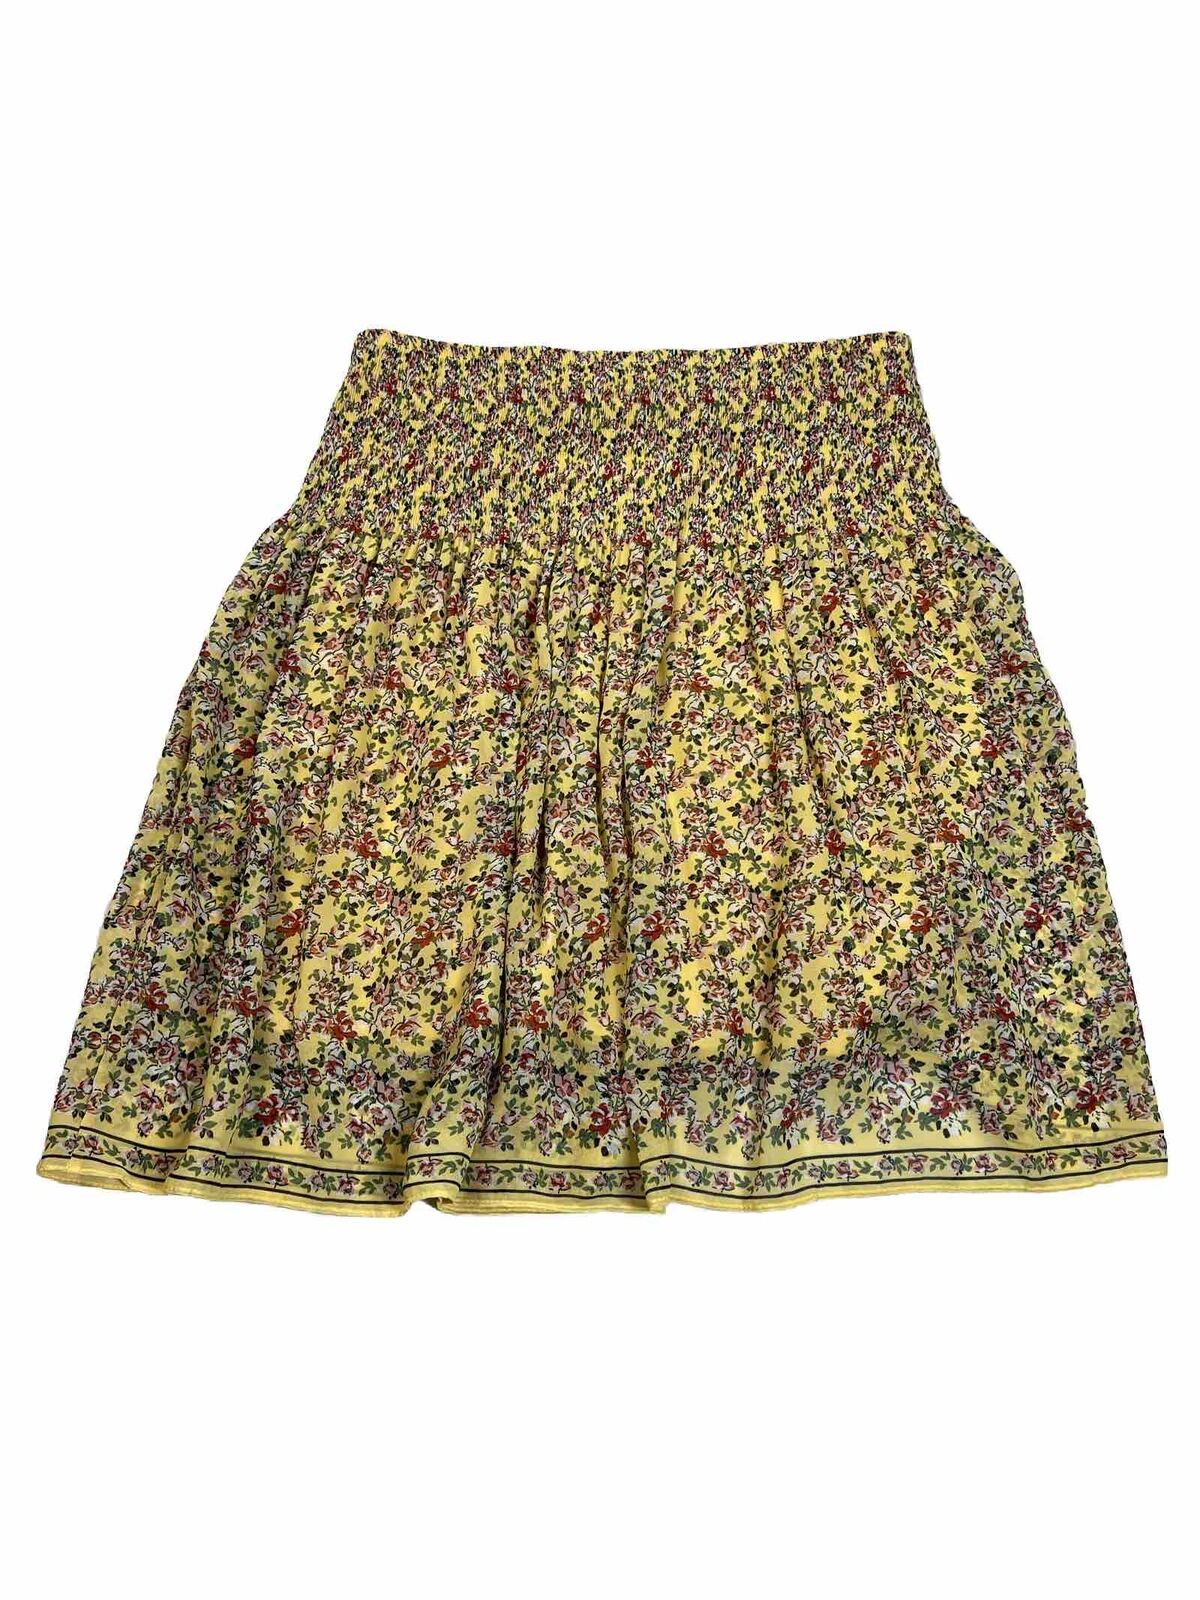 Max Studio Women's Yellow Floral Pleated Skirt - M